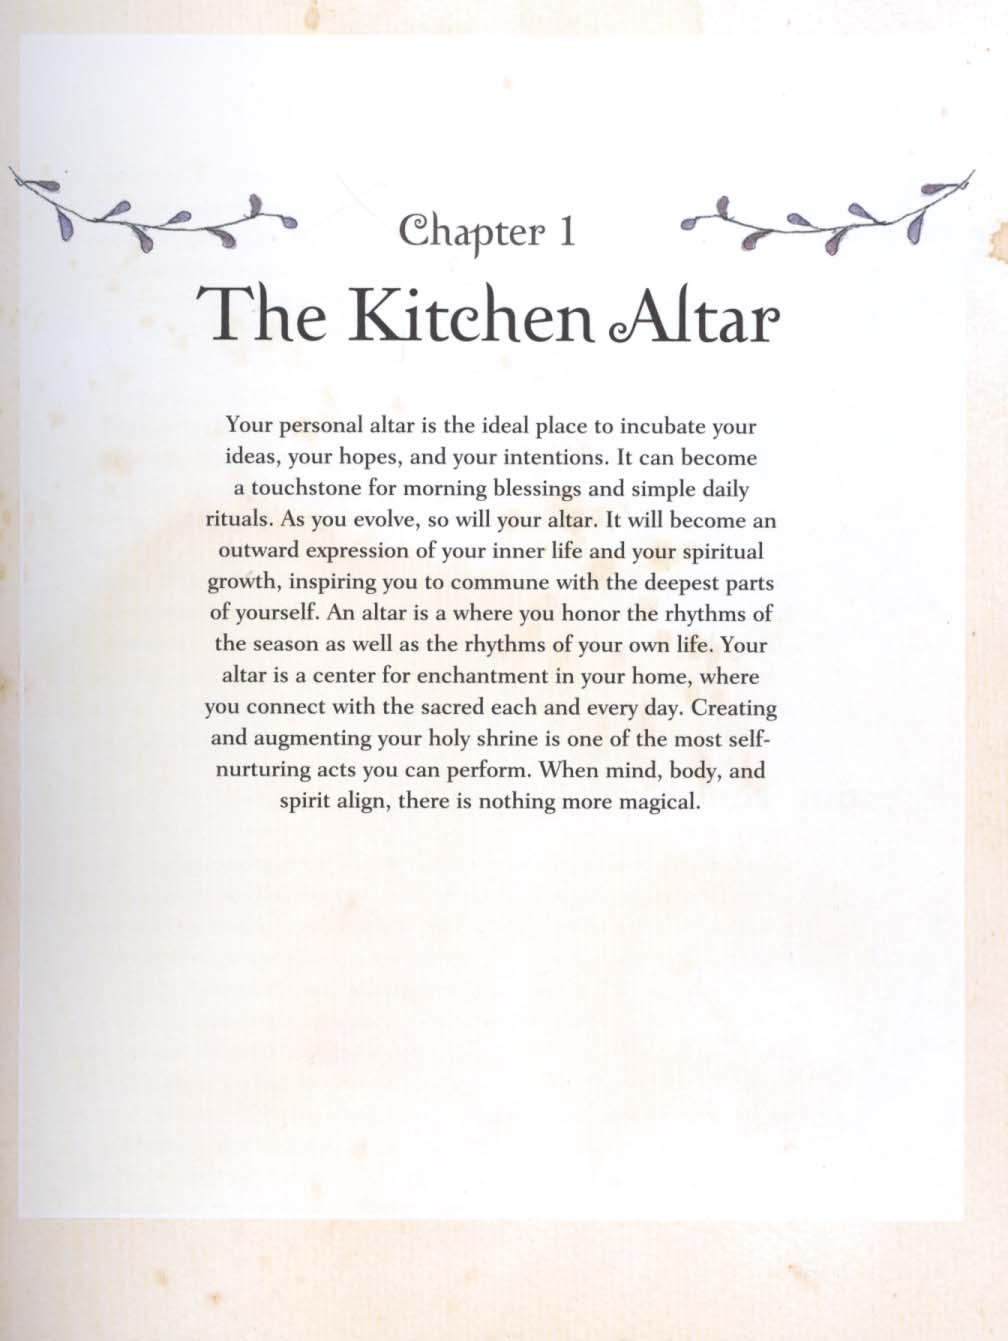 Book of Kitchen Witchery